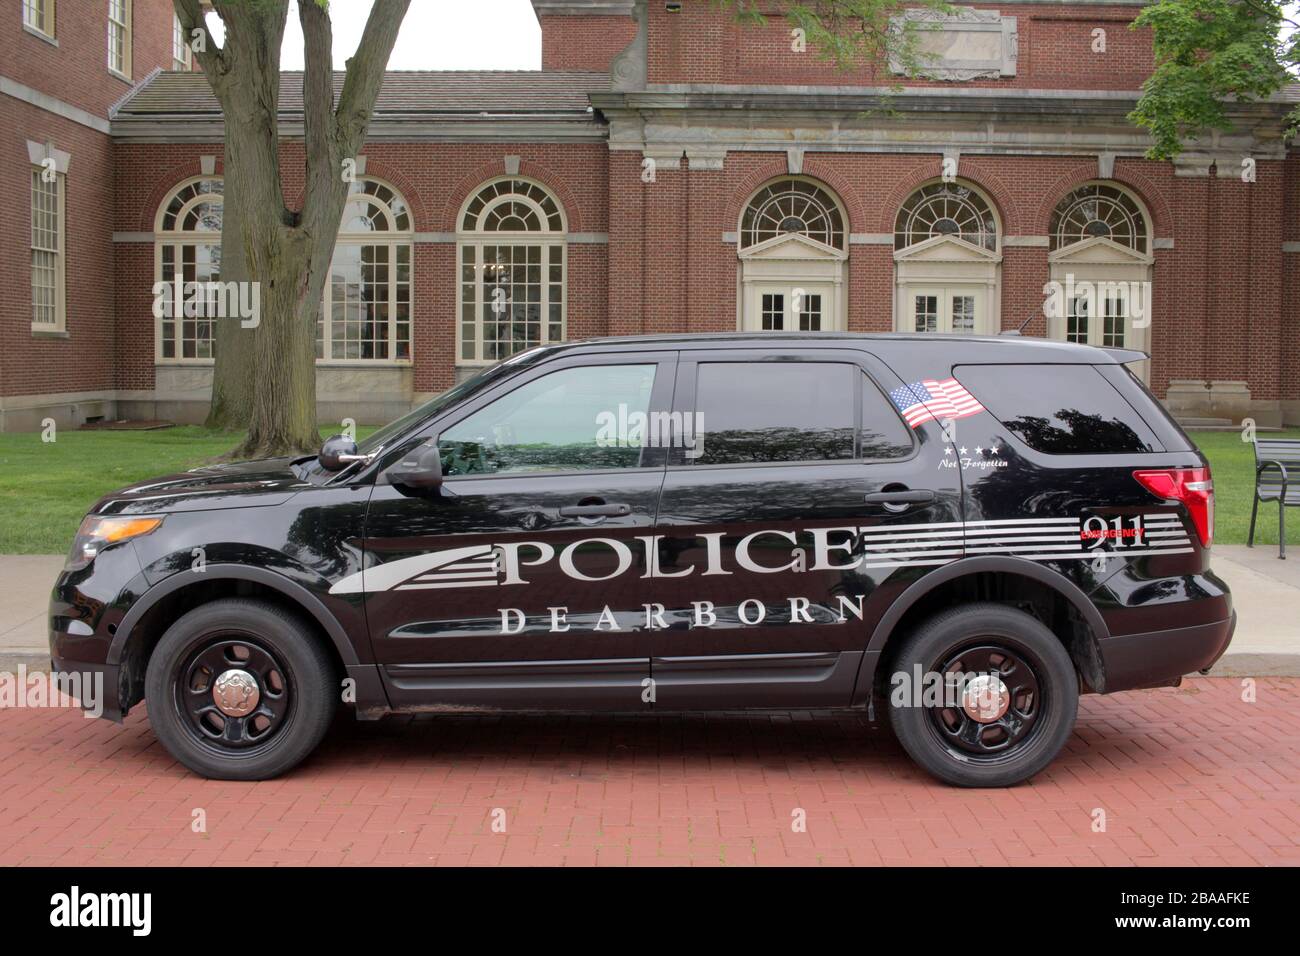 Dearborn Police Department vehicle fuori dal museo Henry Ford, Dearborn, Michigan, USA Foto Stock